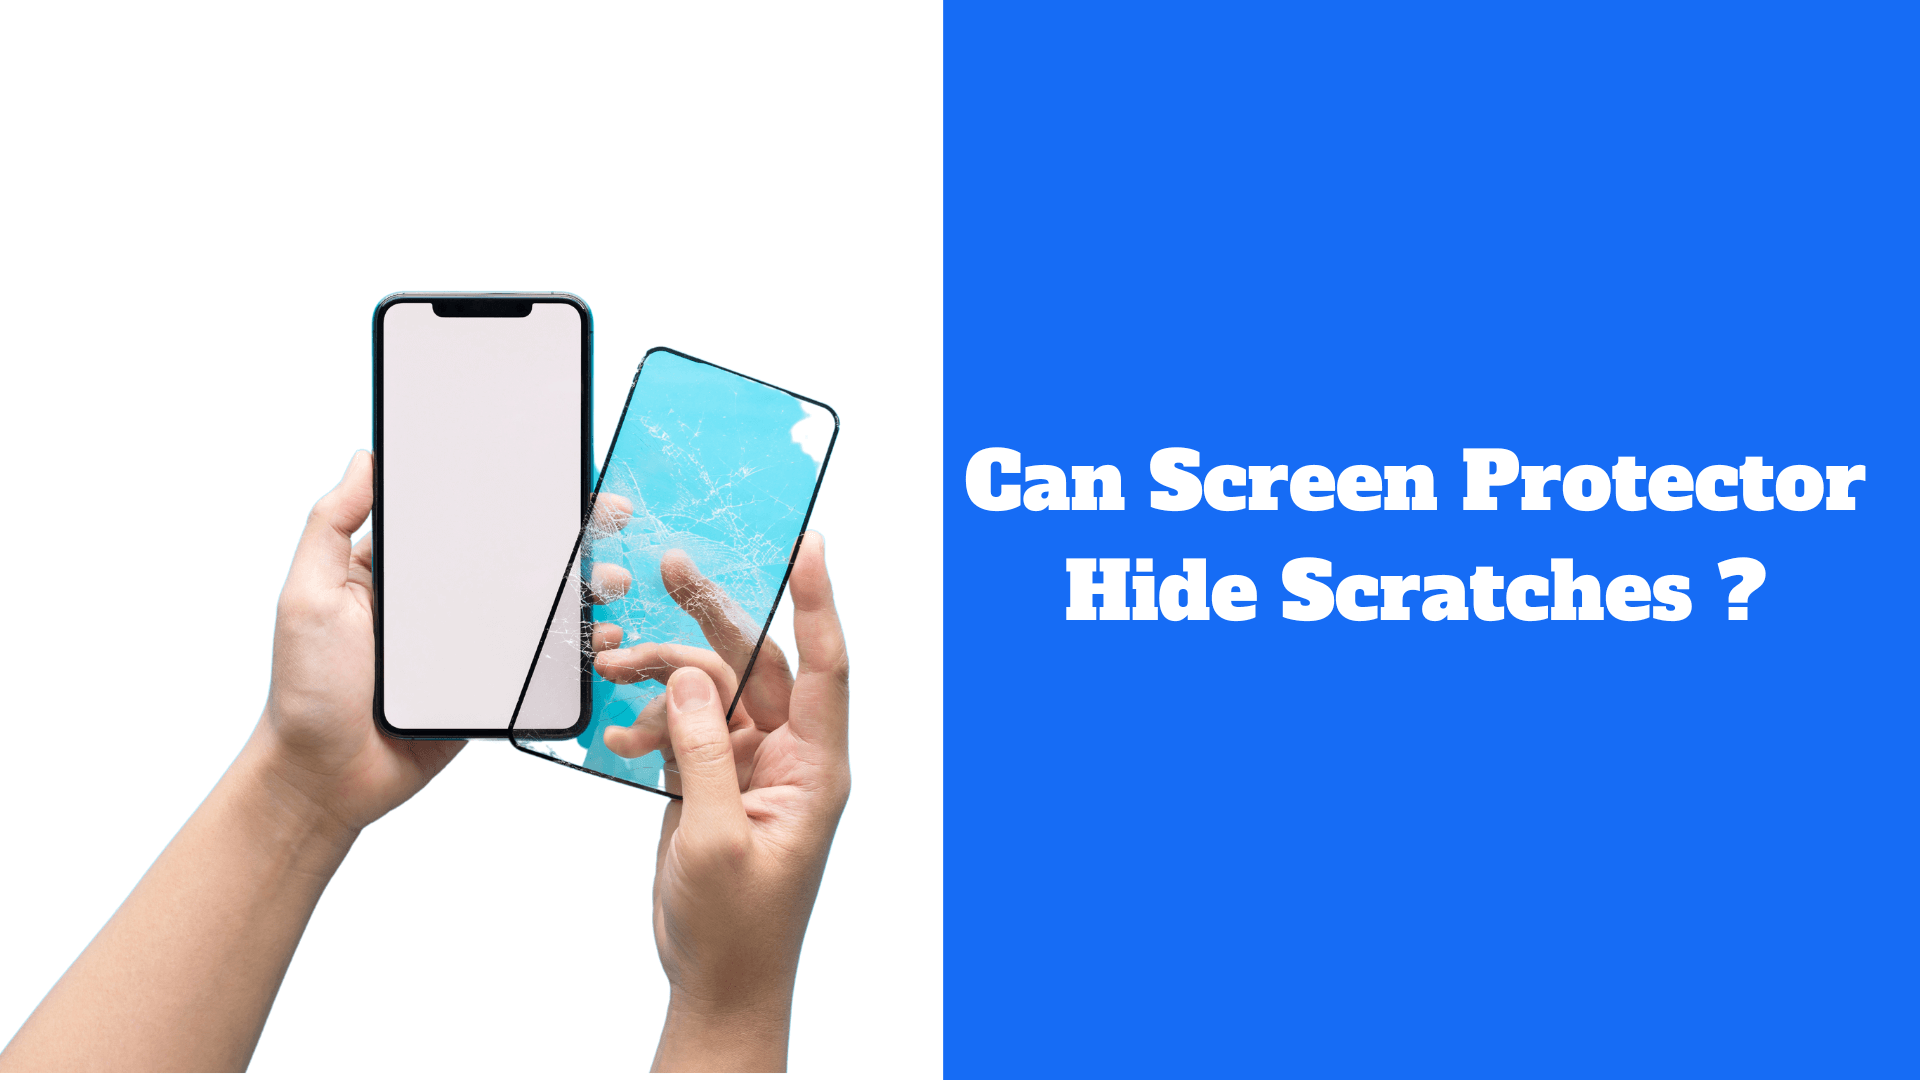 Can Screen Protector Hide Scratches